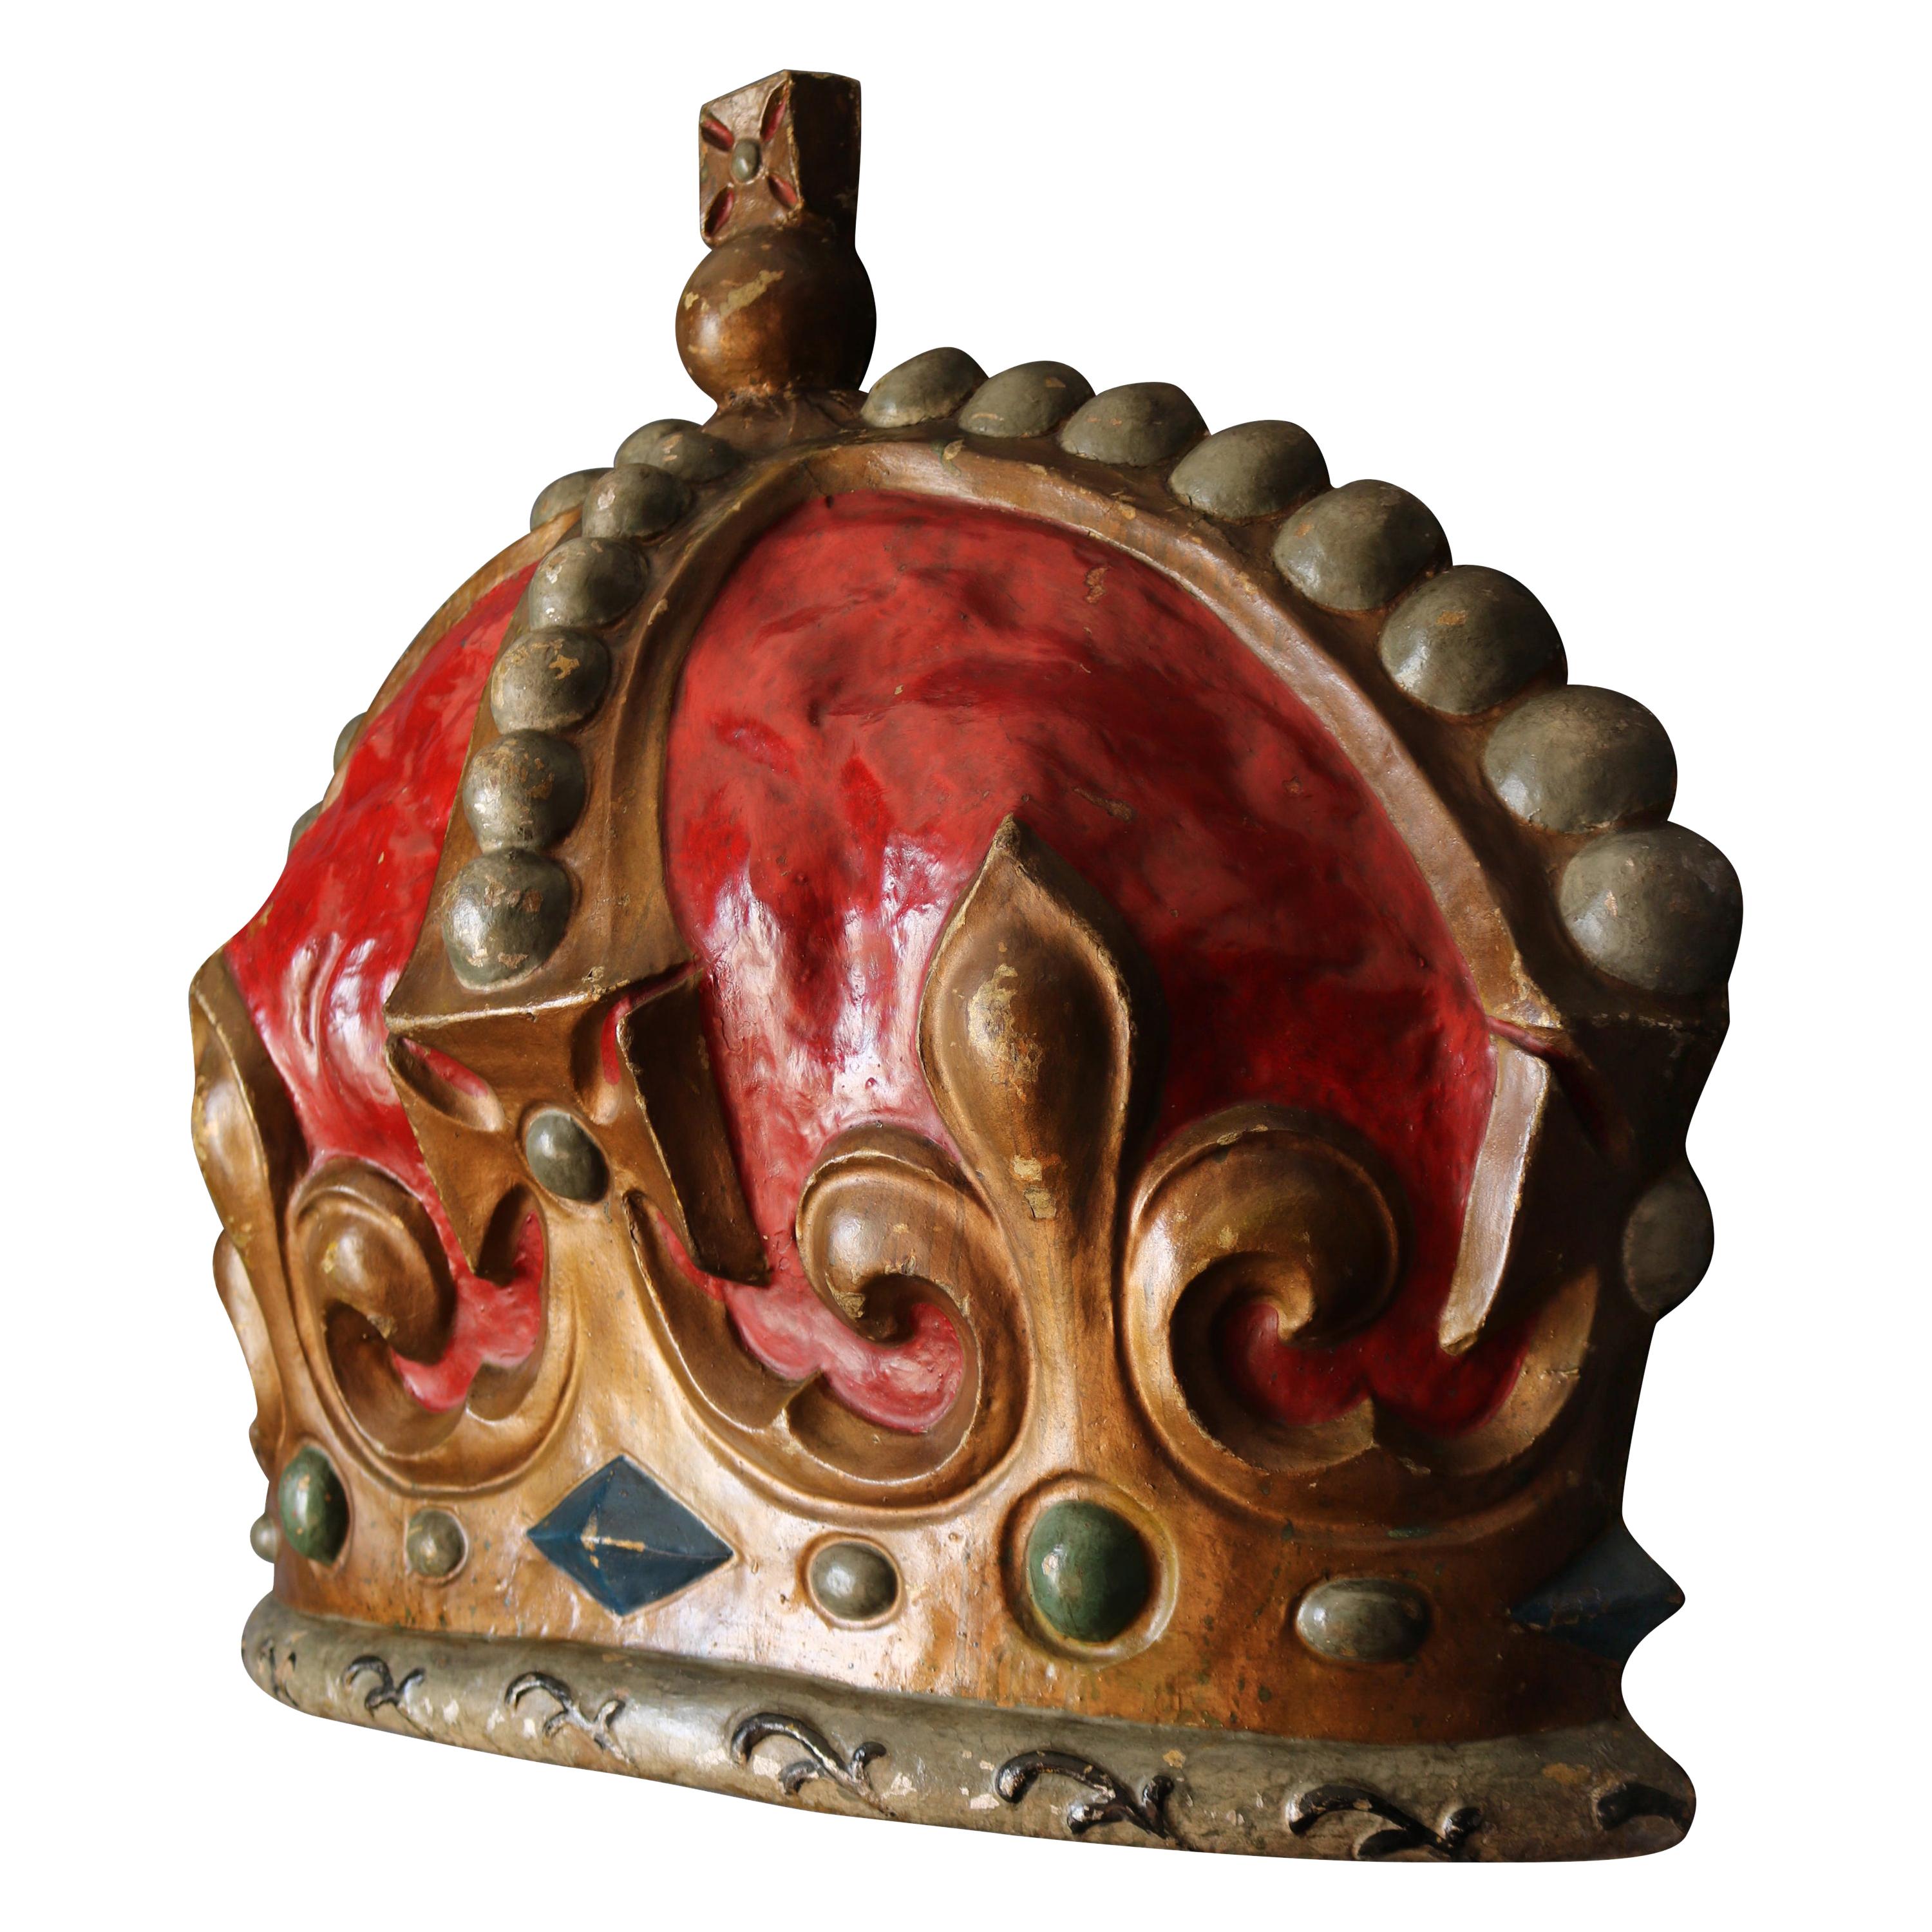 Large Papier Mâché Crown from the Coronation of King George VI and Elizabeth